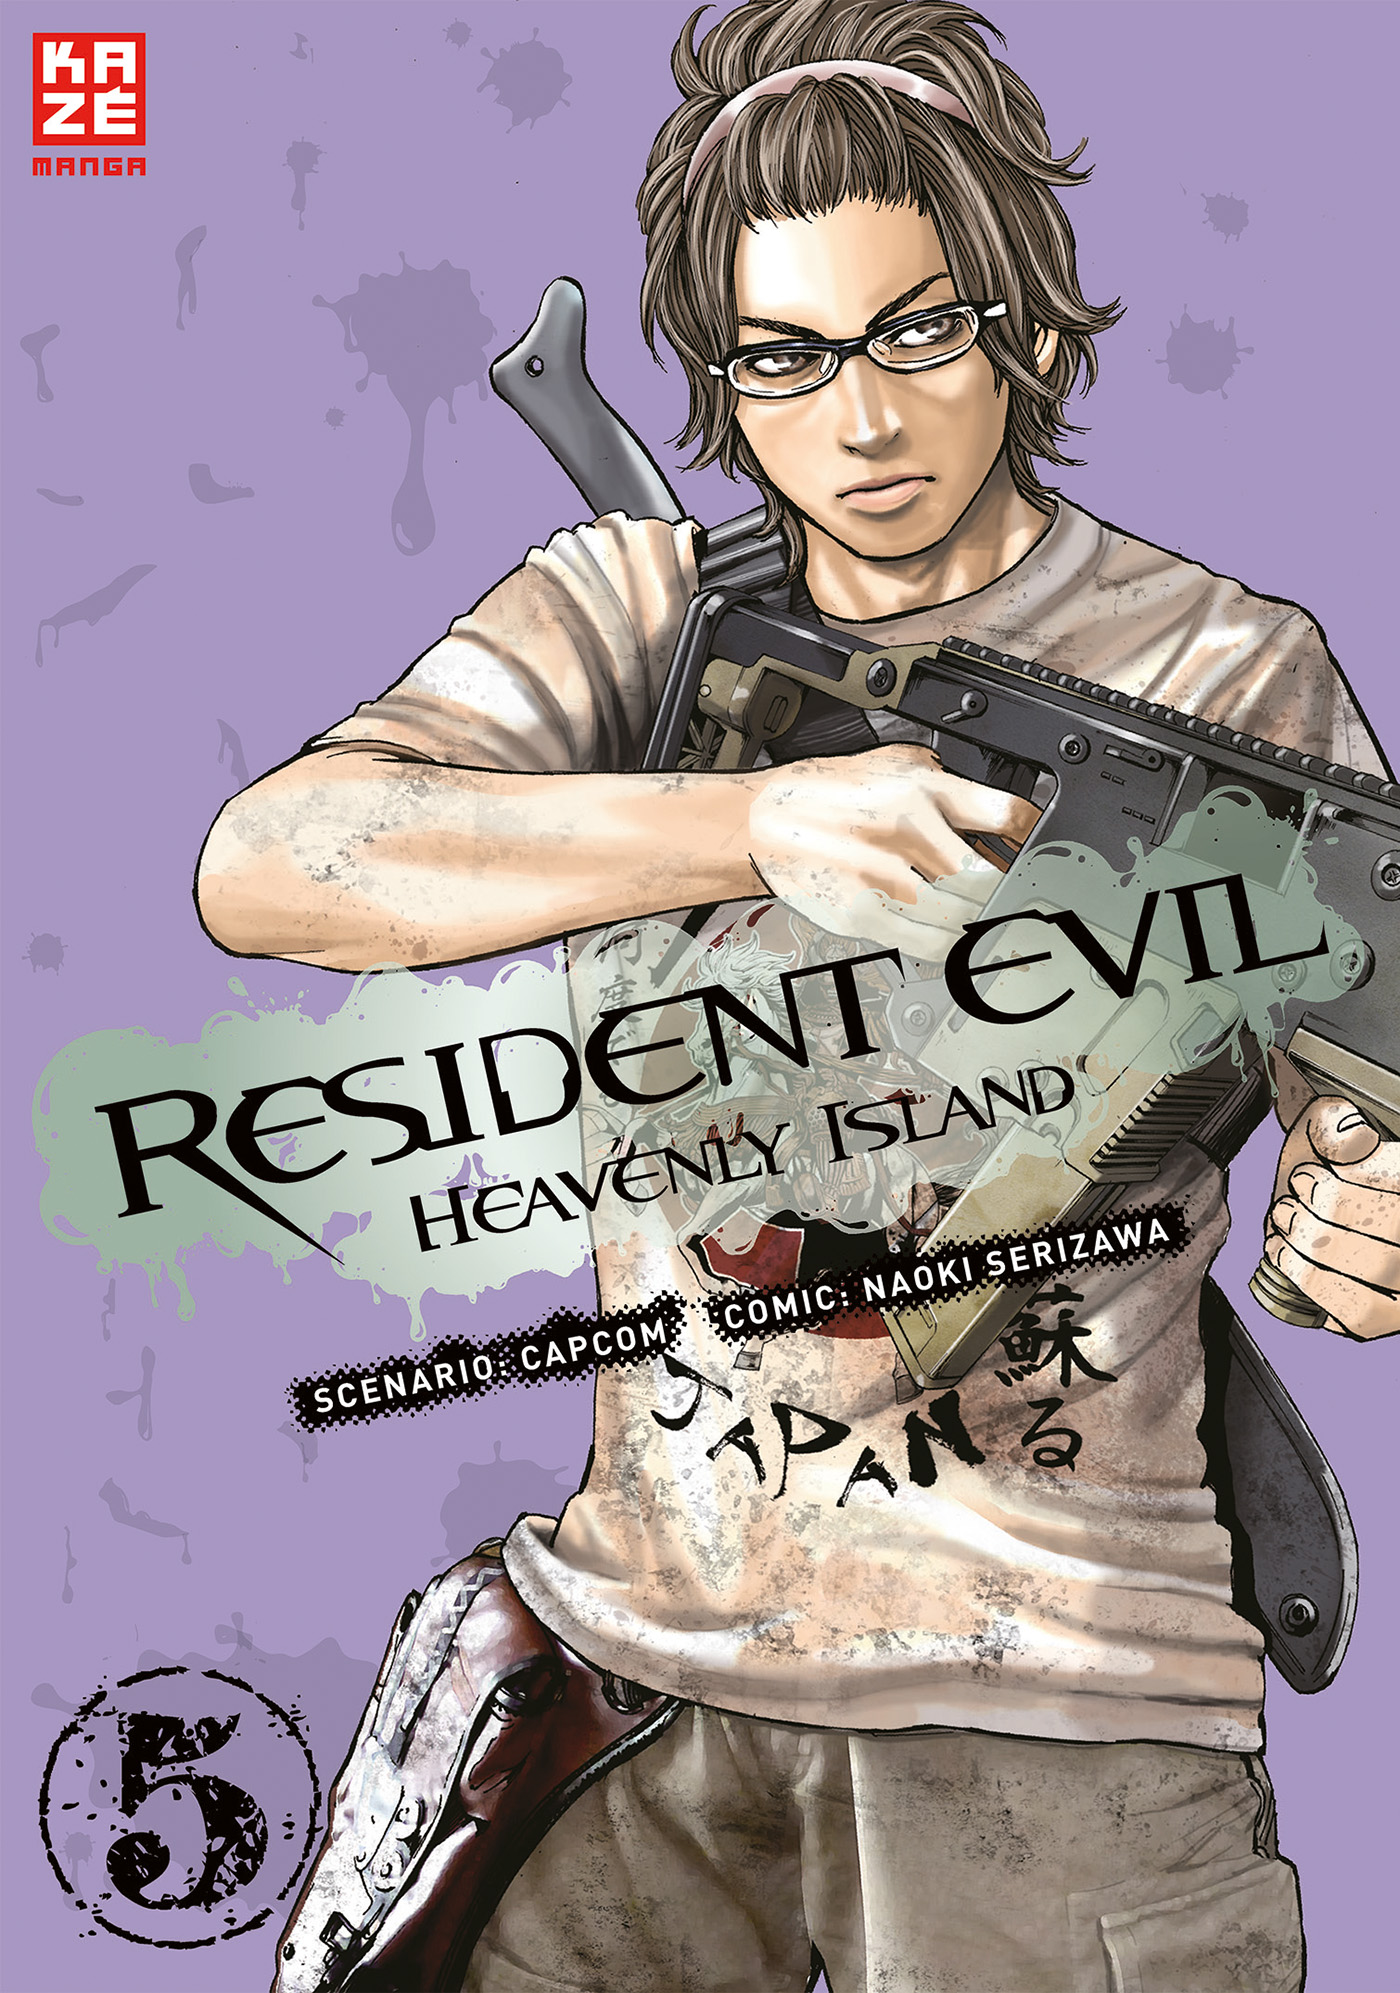 5 (Finale) Evil Resident – – Heavenly Island Band